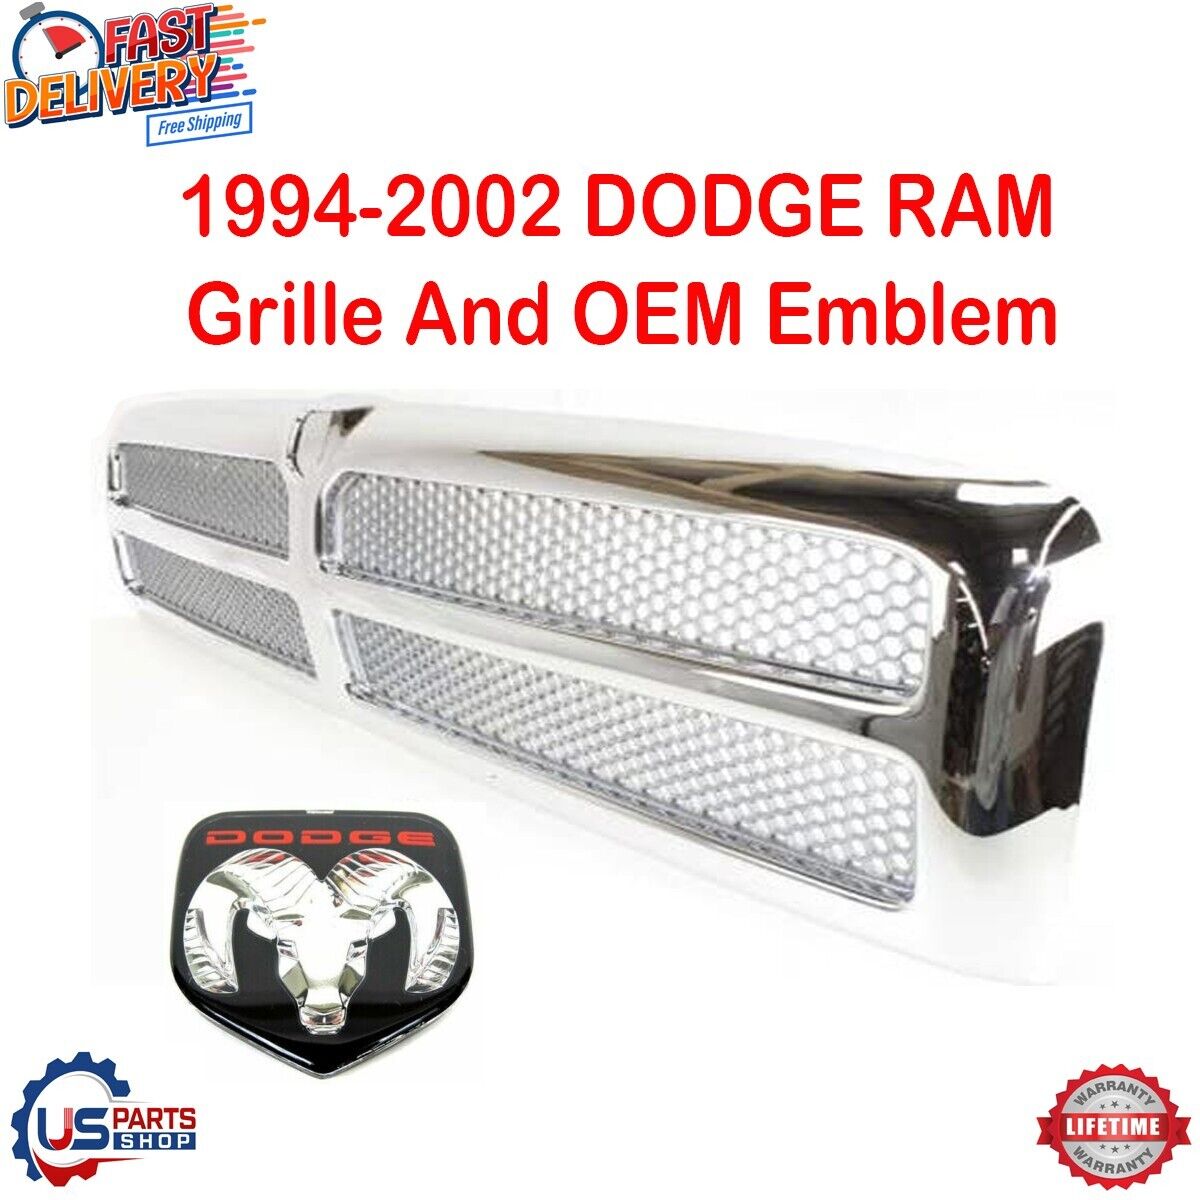 New Grill Grille Chrome And OEM Emblem Fits 1994-2002 Dodge Ram Pickup 2500 3500